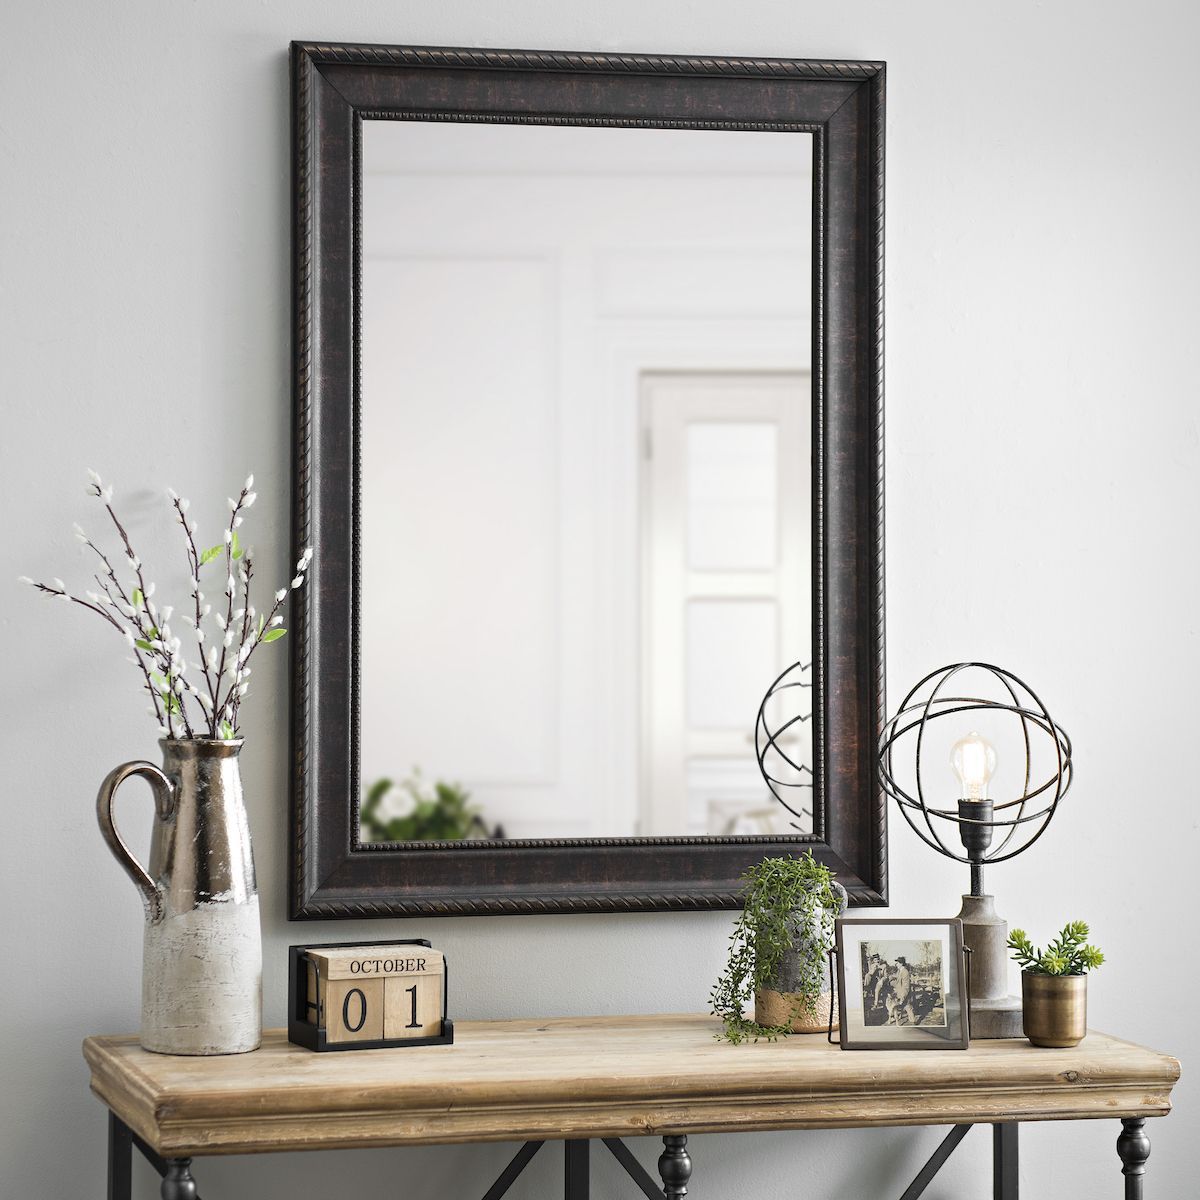 This Bronze Mirror Is Perfect For A Bathroom Reno! | Framed Mirror Wall With Regard To Silver And Bronze Wall Mirrors (View 8 of 15)